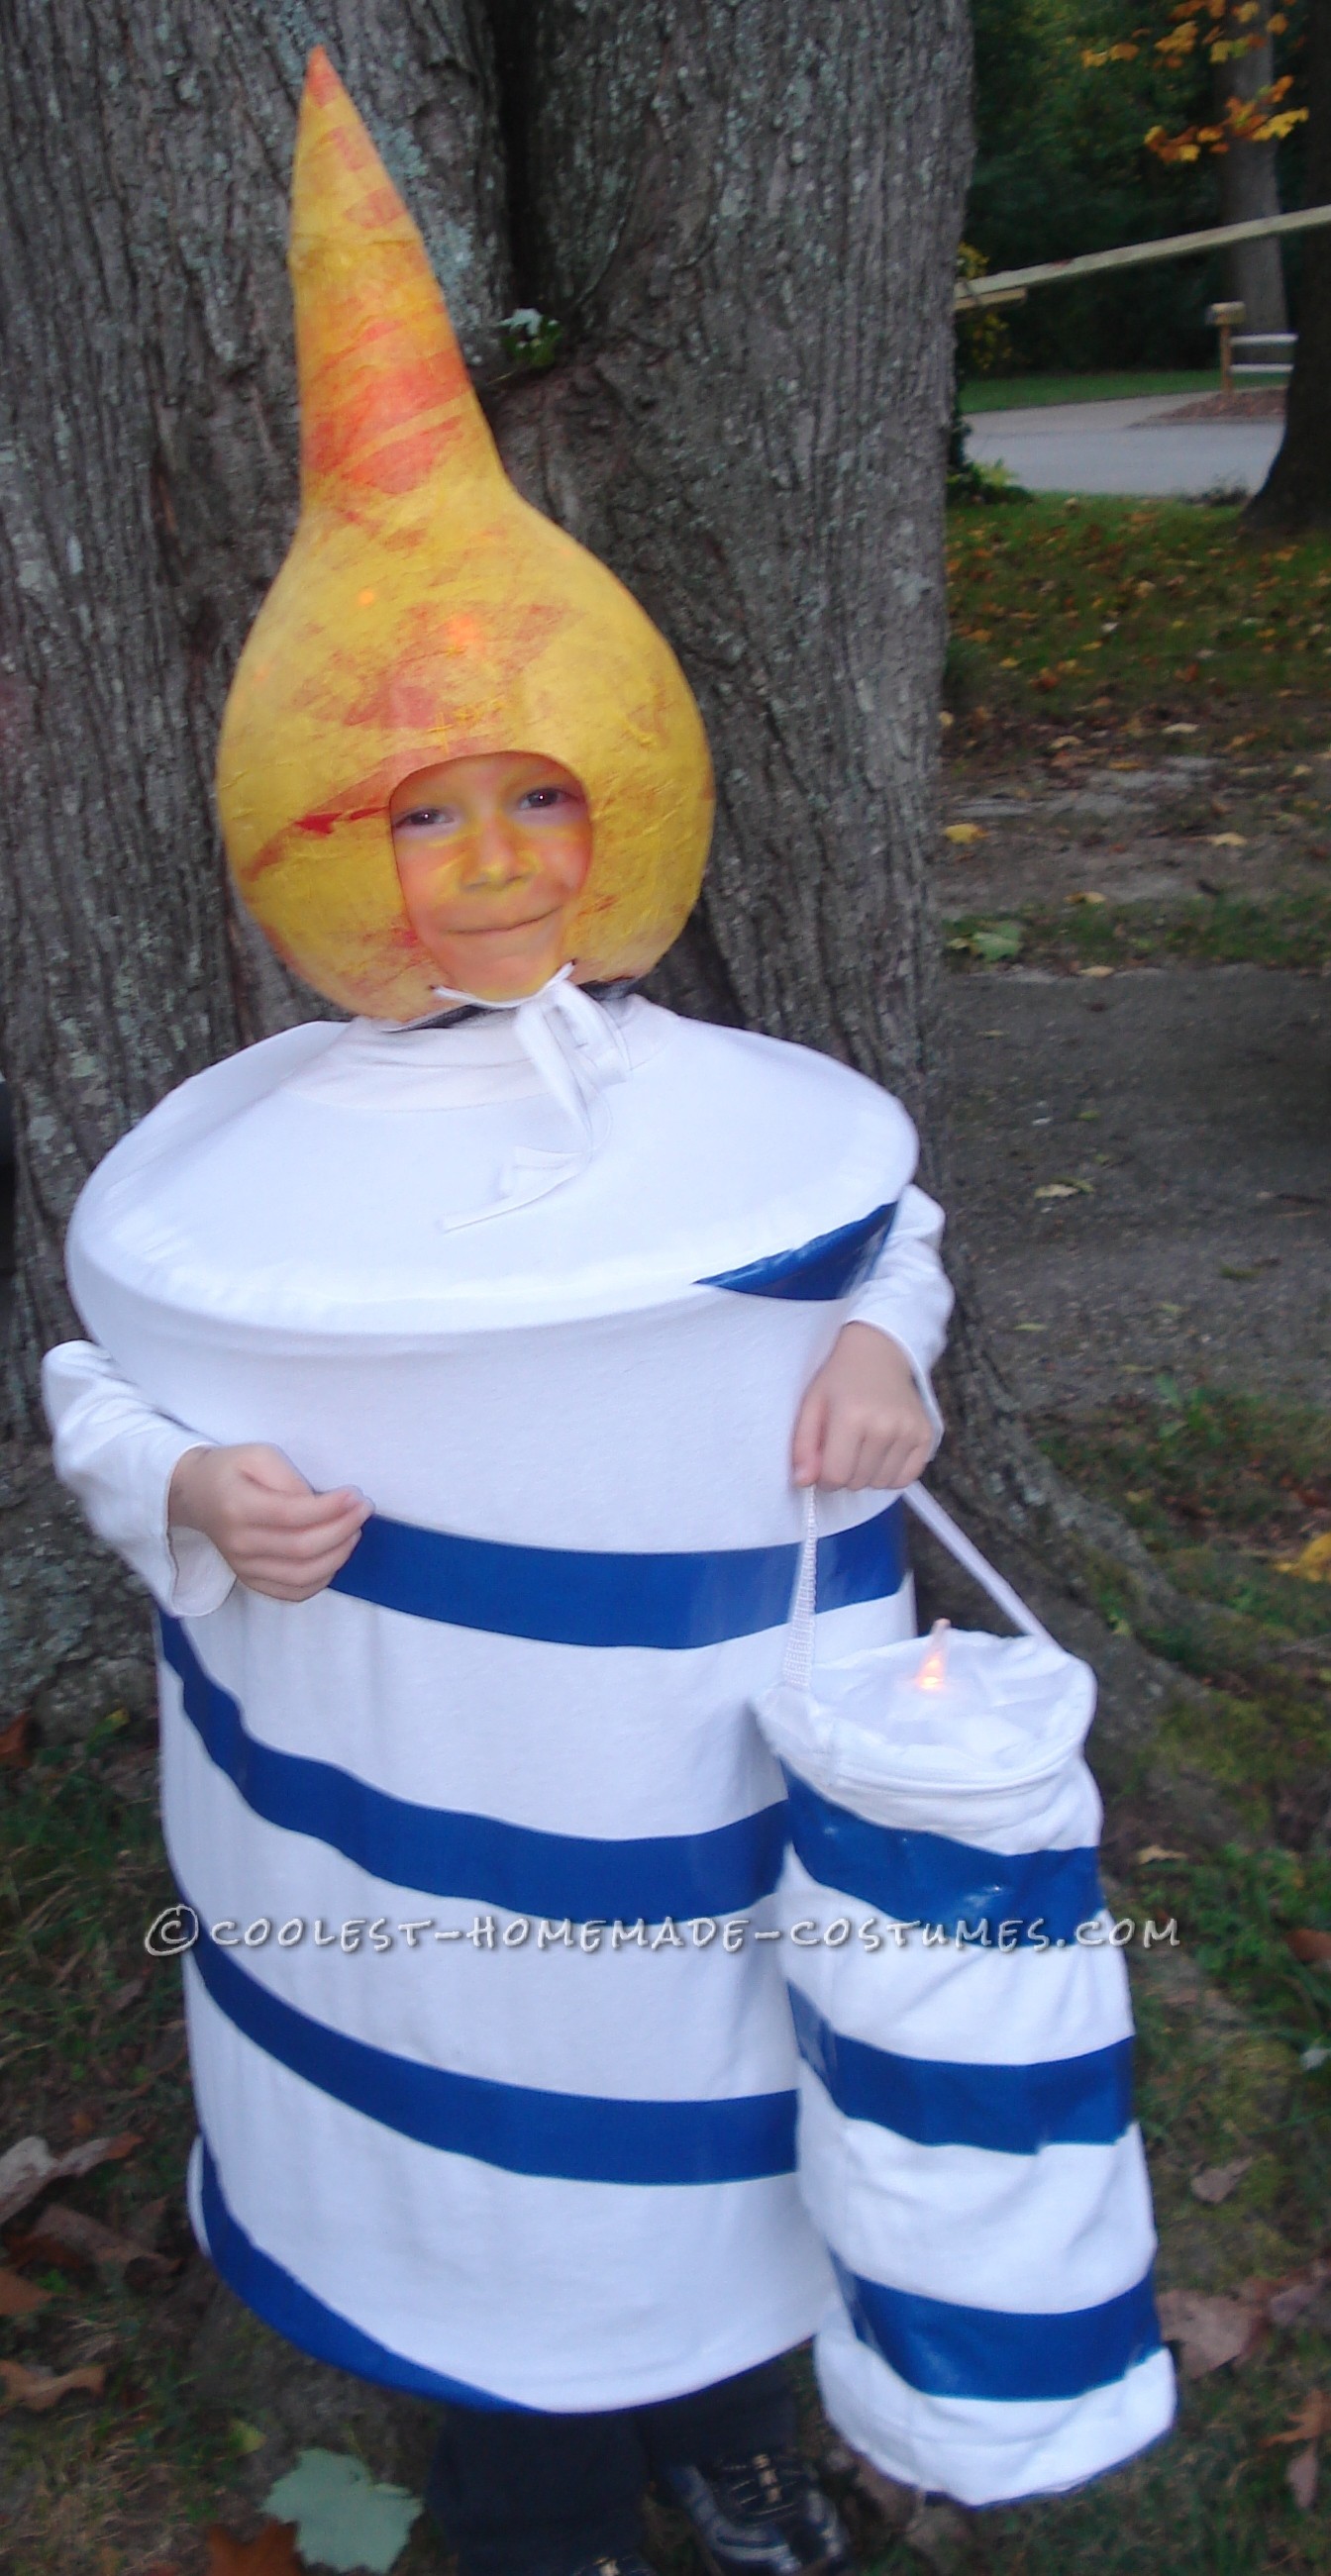 Striped Birthday Candle Costume with Lighted Flame